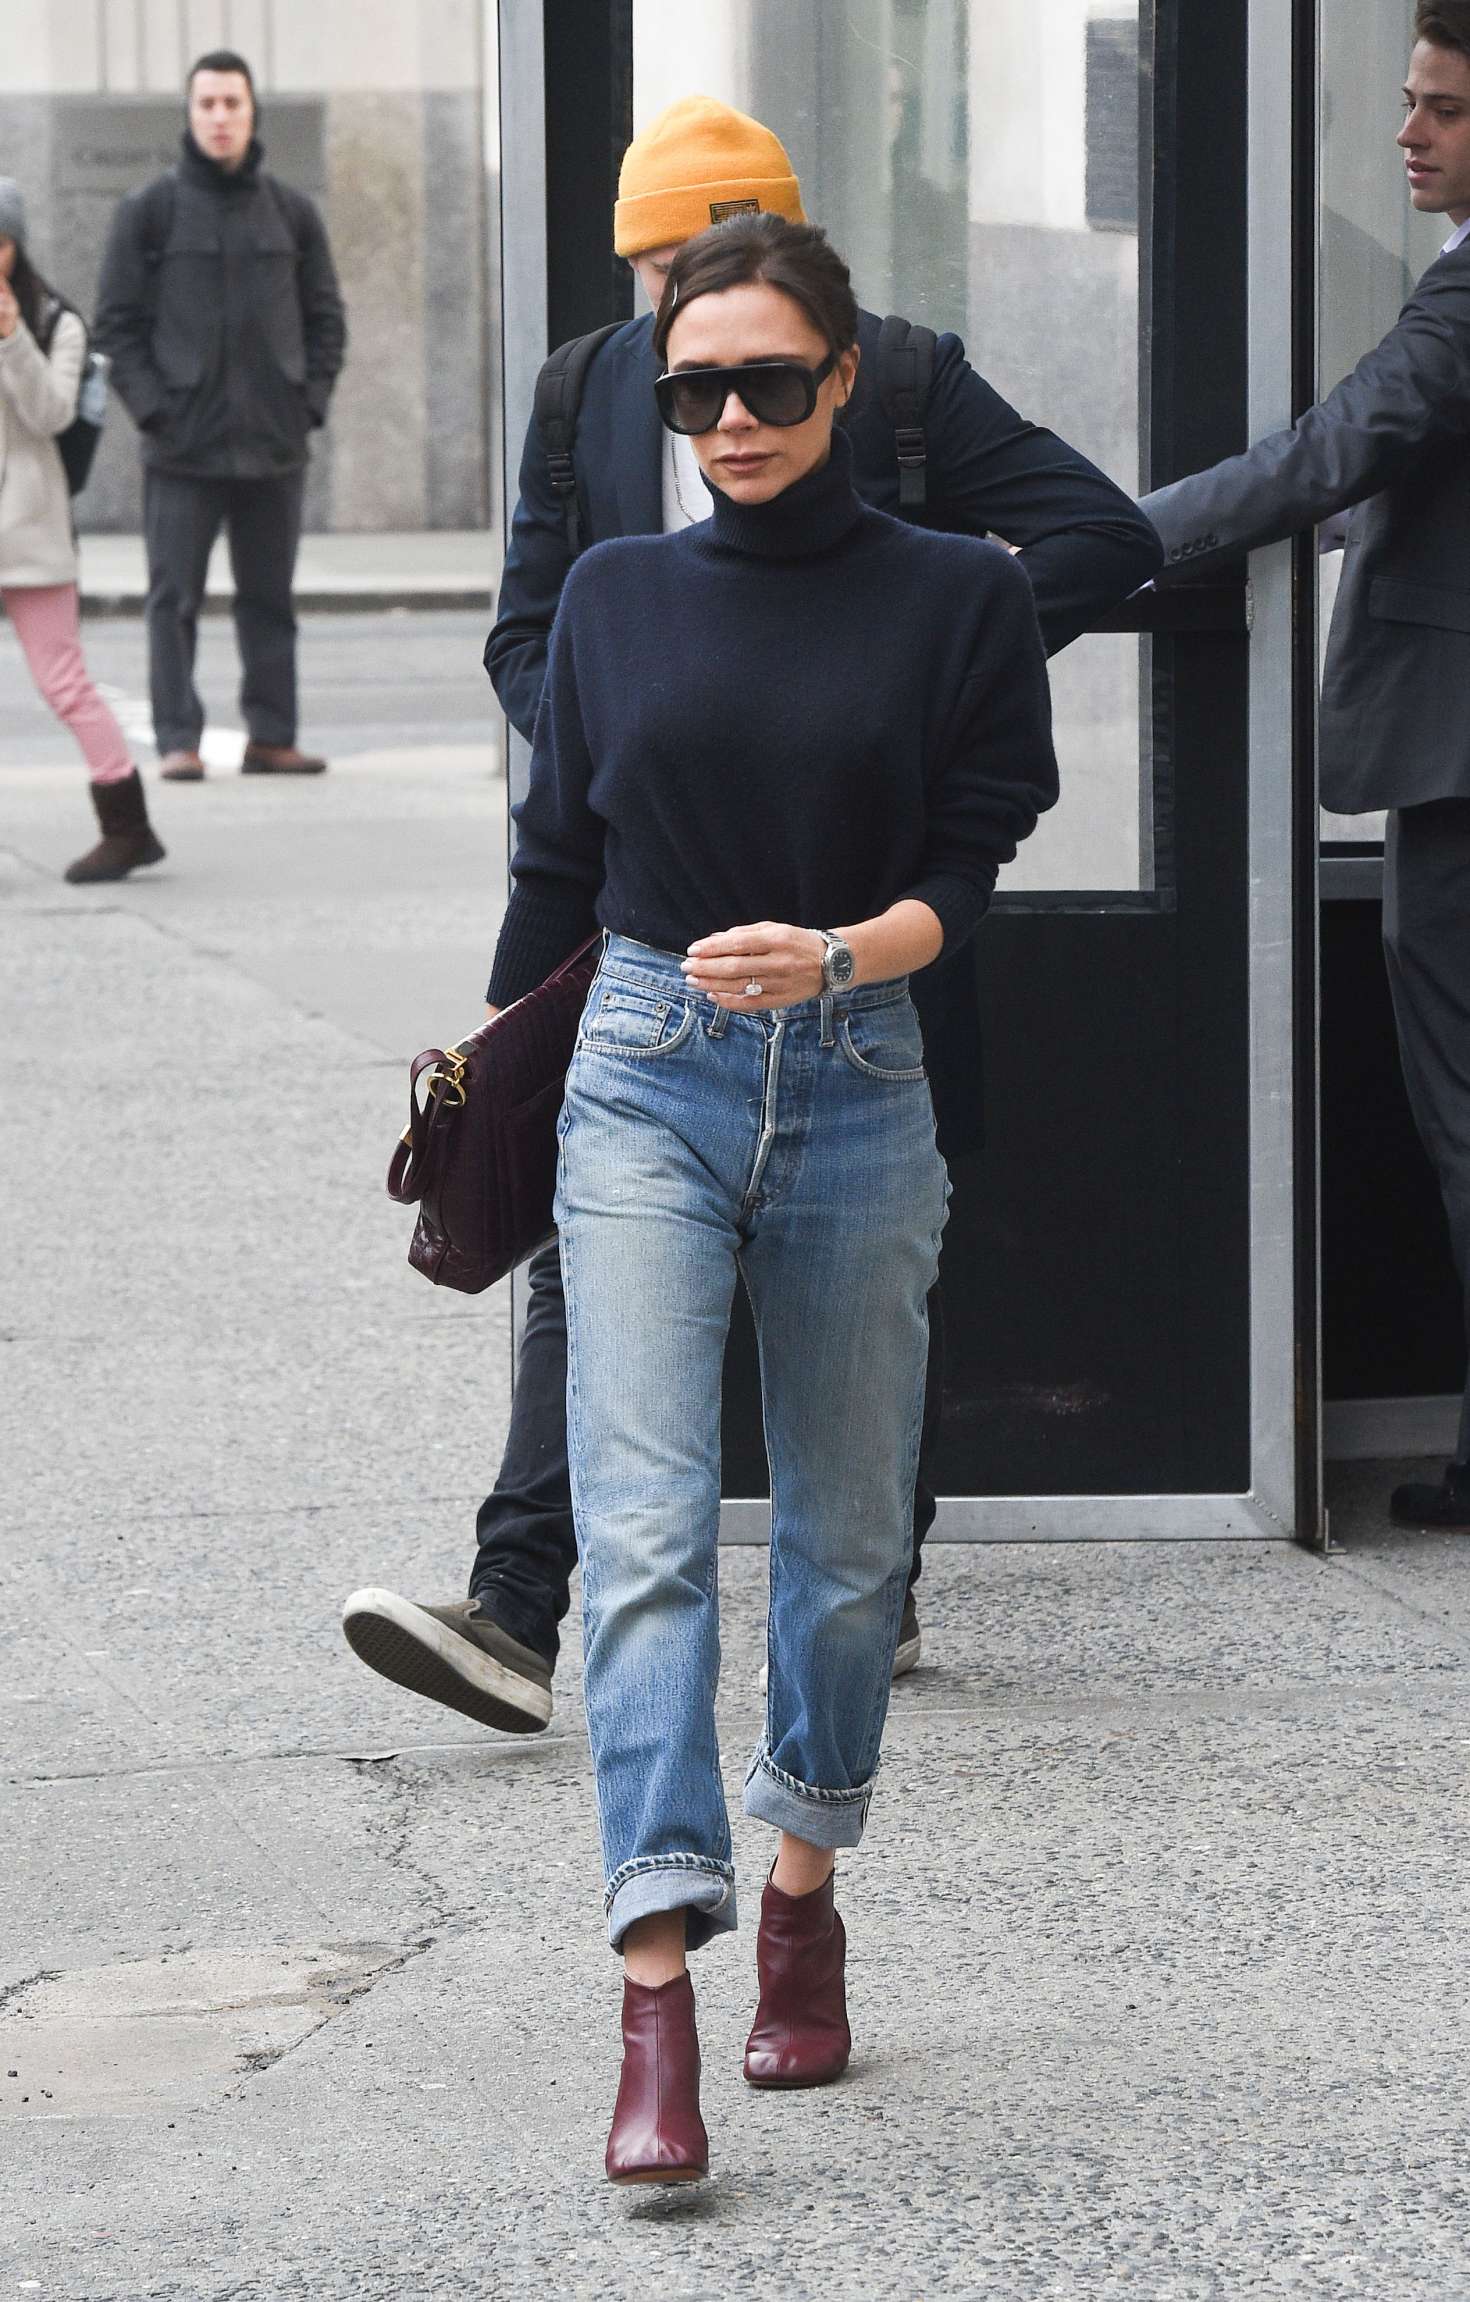 Victoria Beckham in Jeans out in New York City | GotCeleb